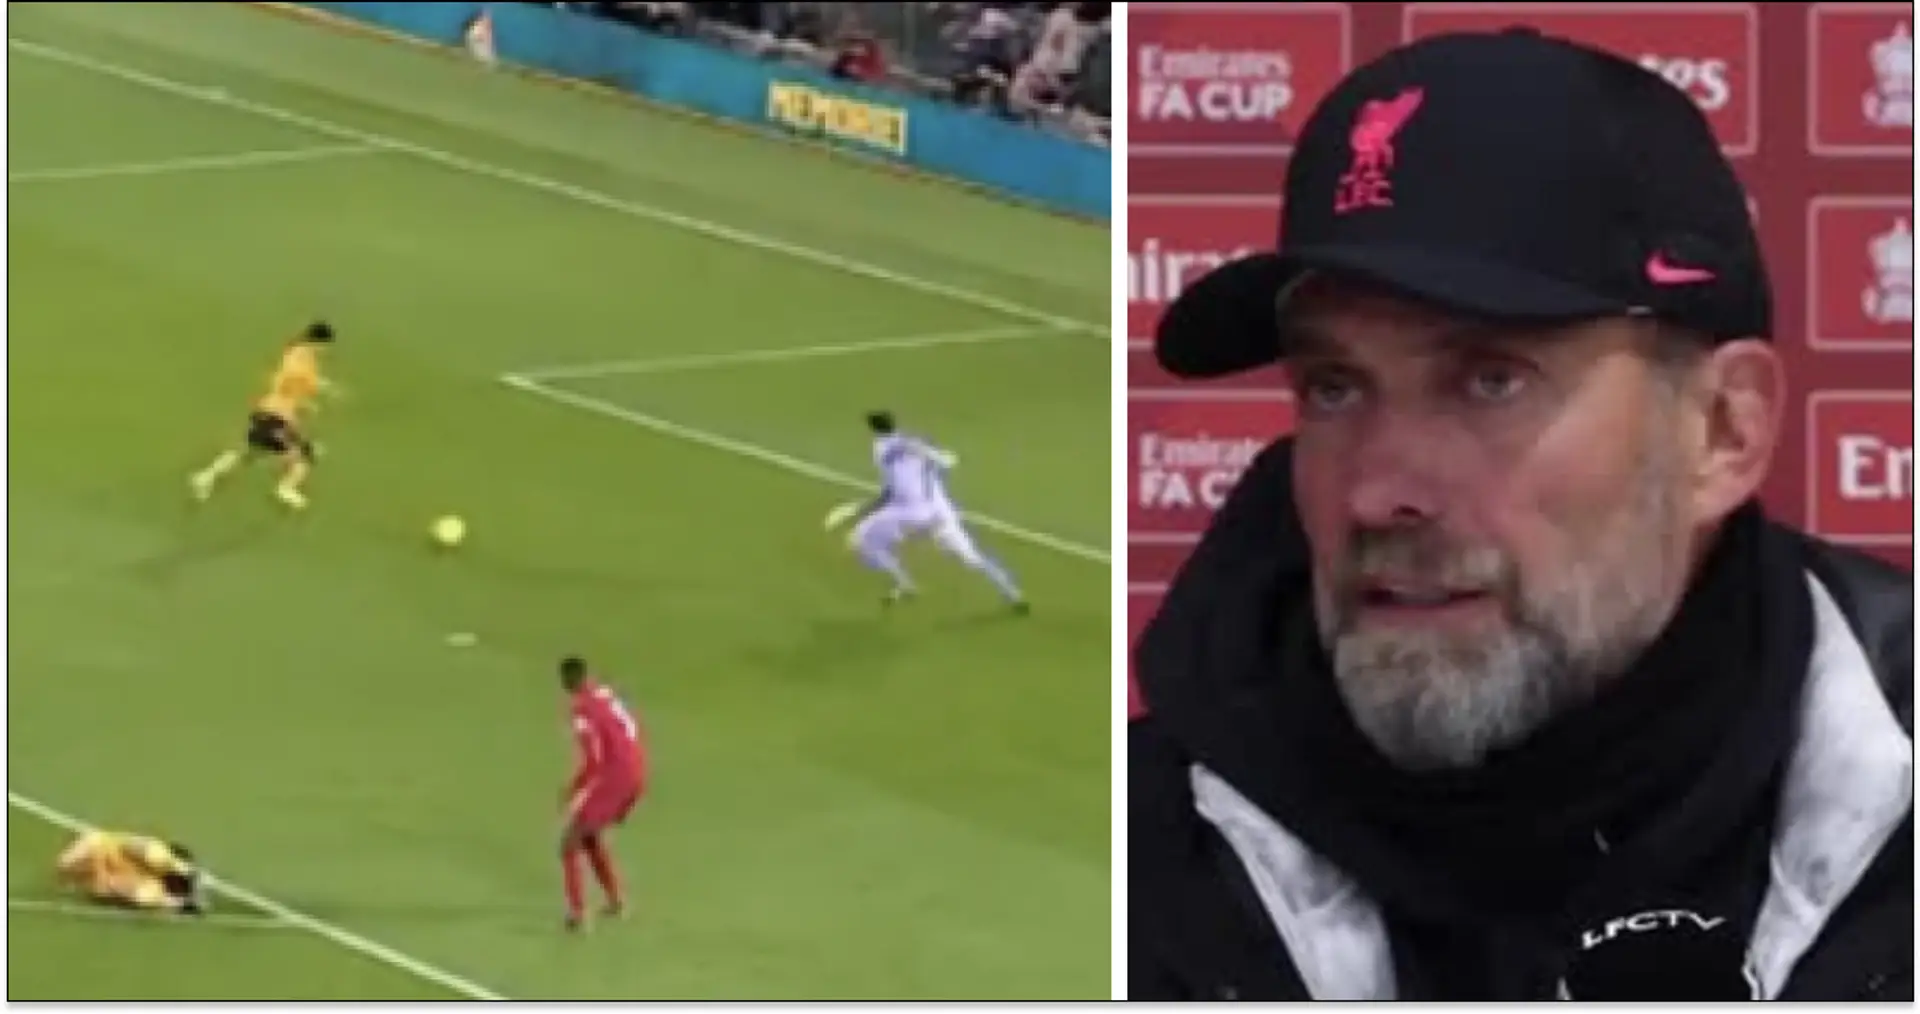 'We know how often Alisson saves our backsides': Klopp defends keeper after Wolves howler